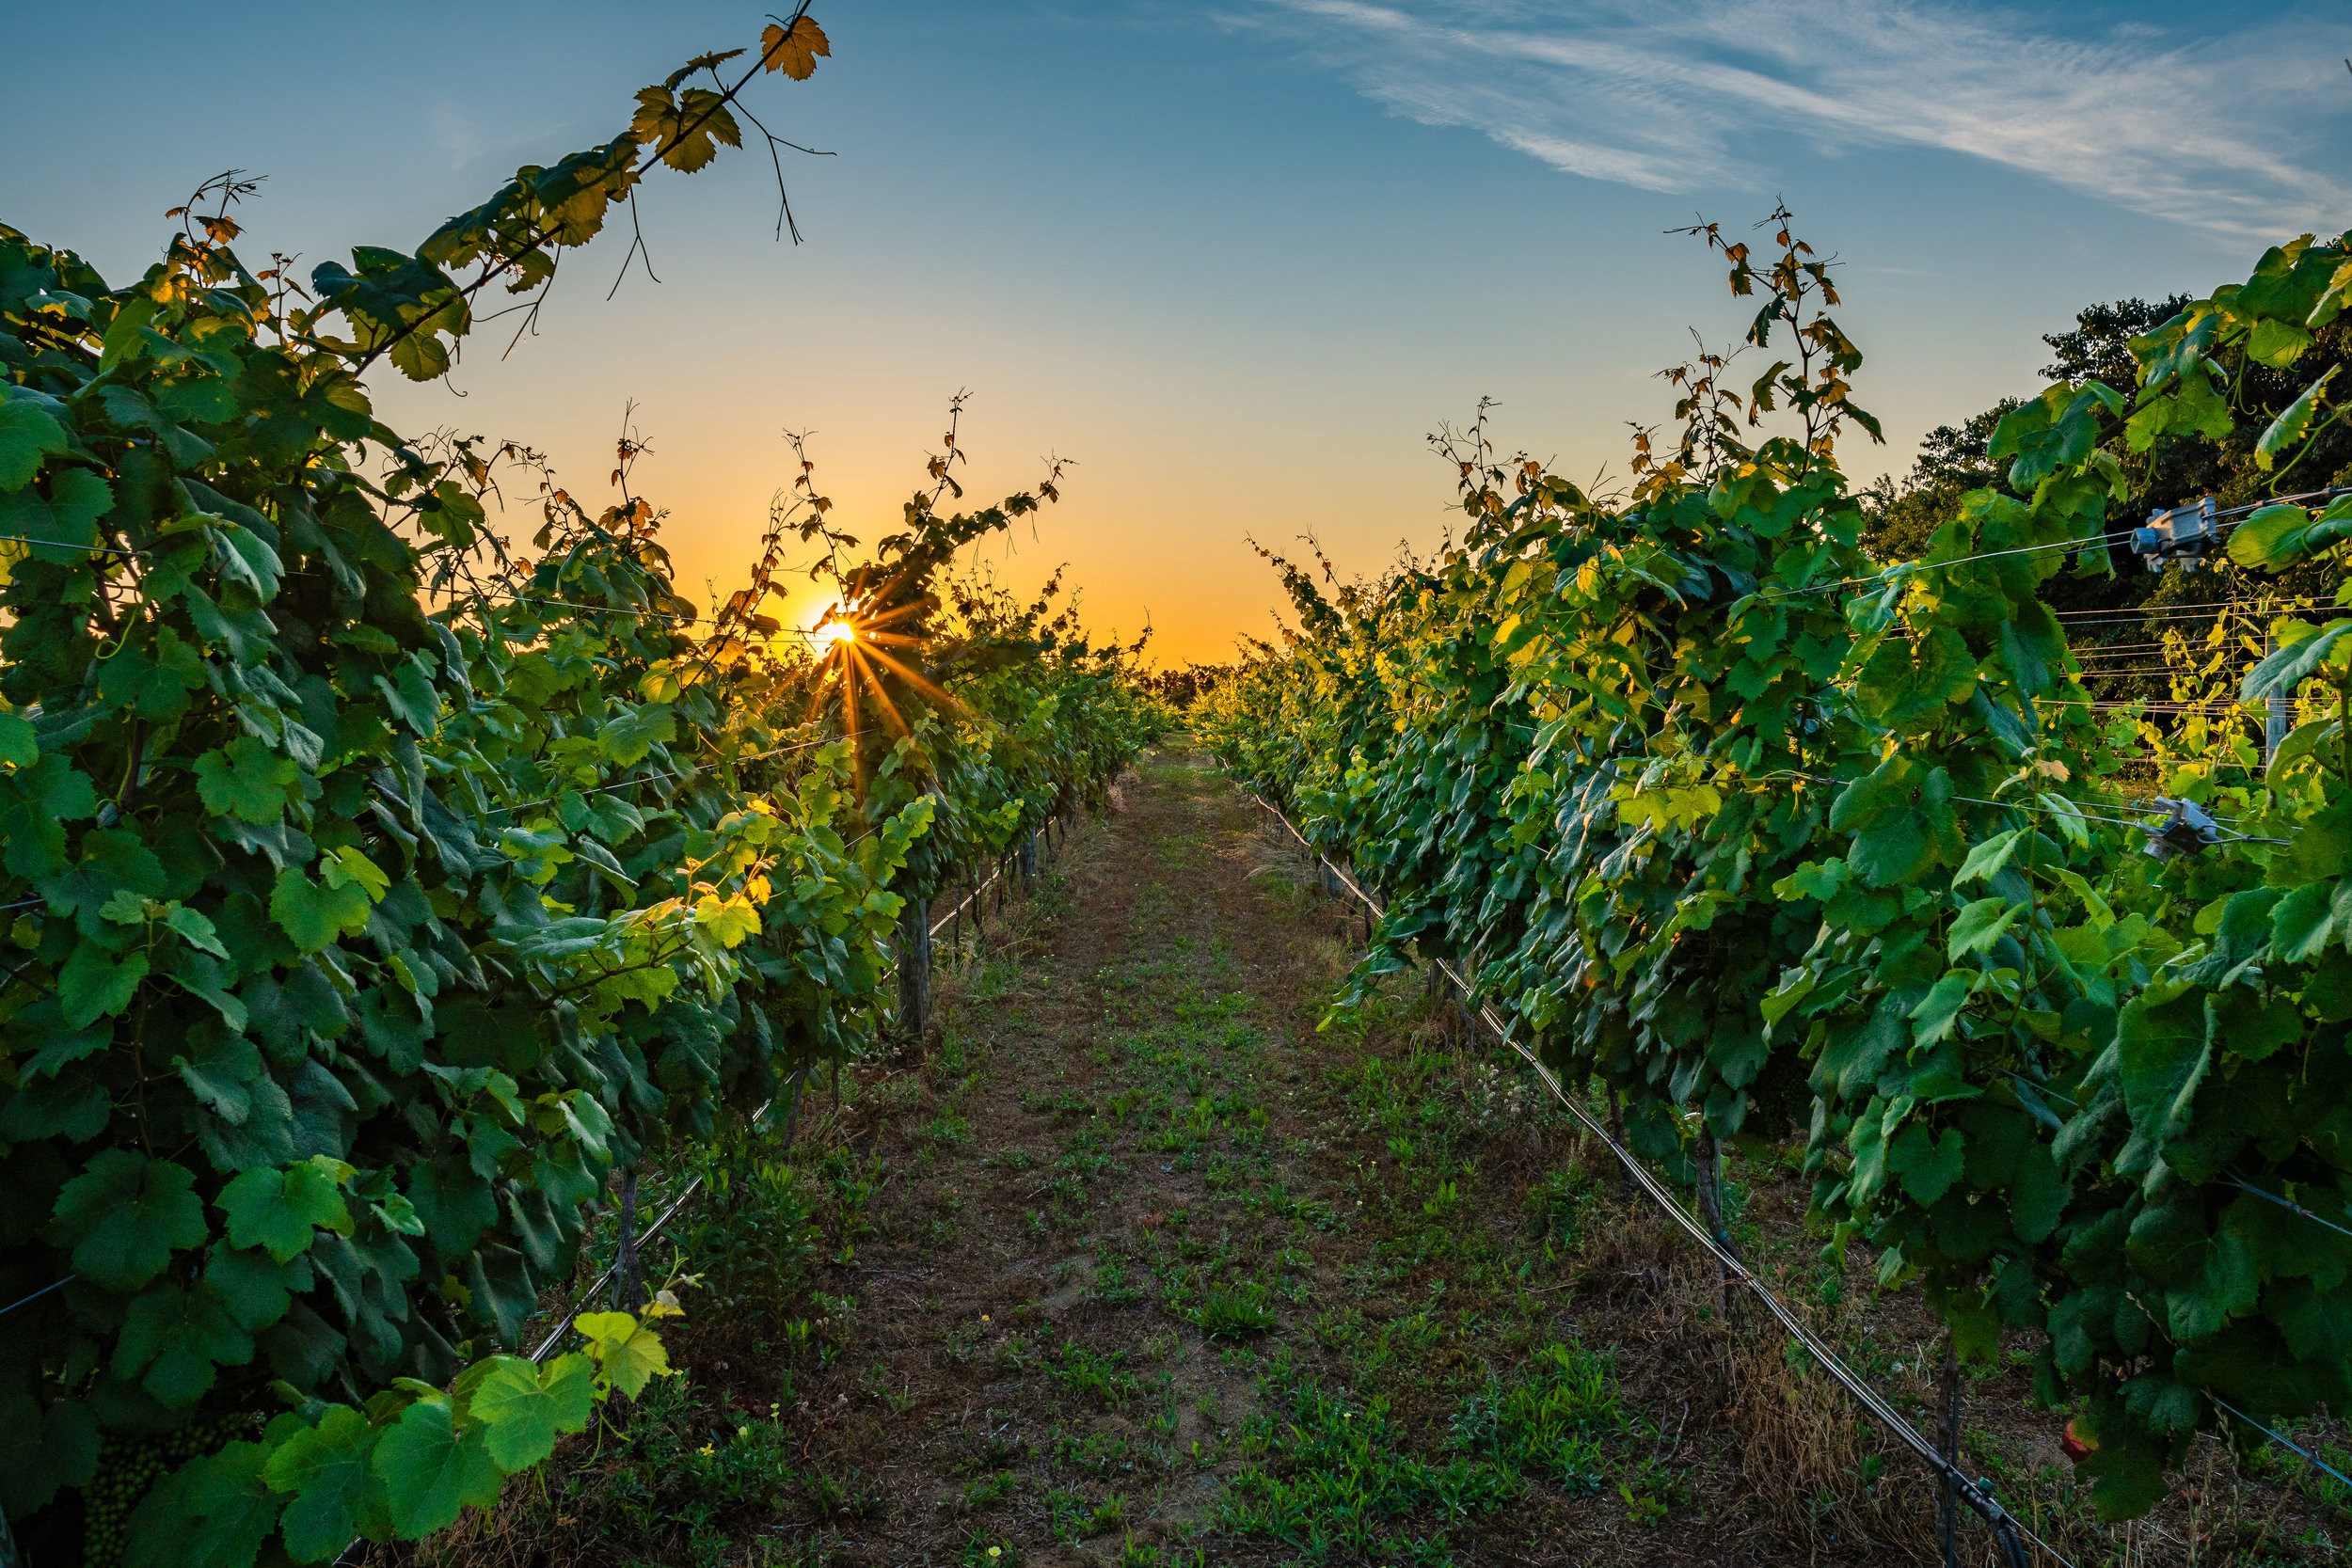 Sunrise photographed through the vineyards at Outer Banks in NC. 